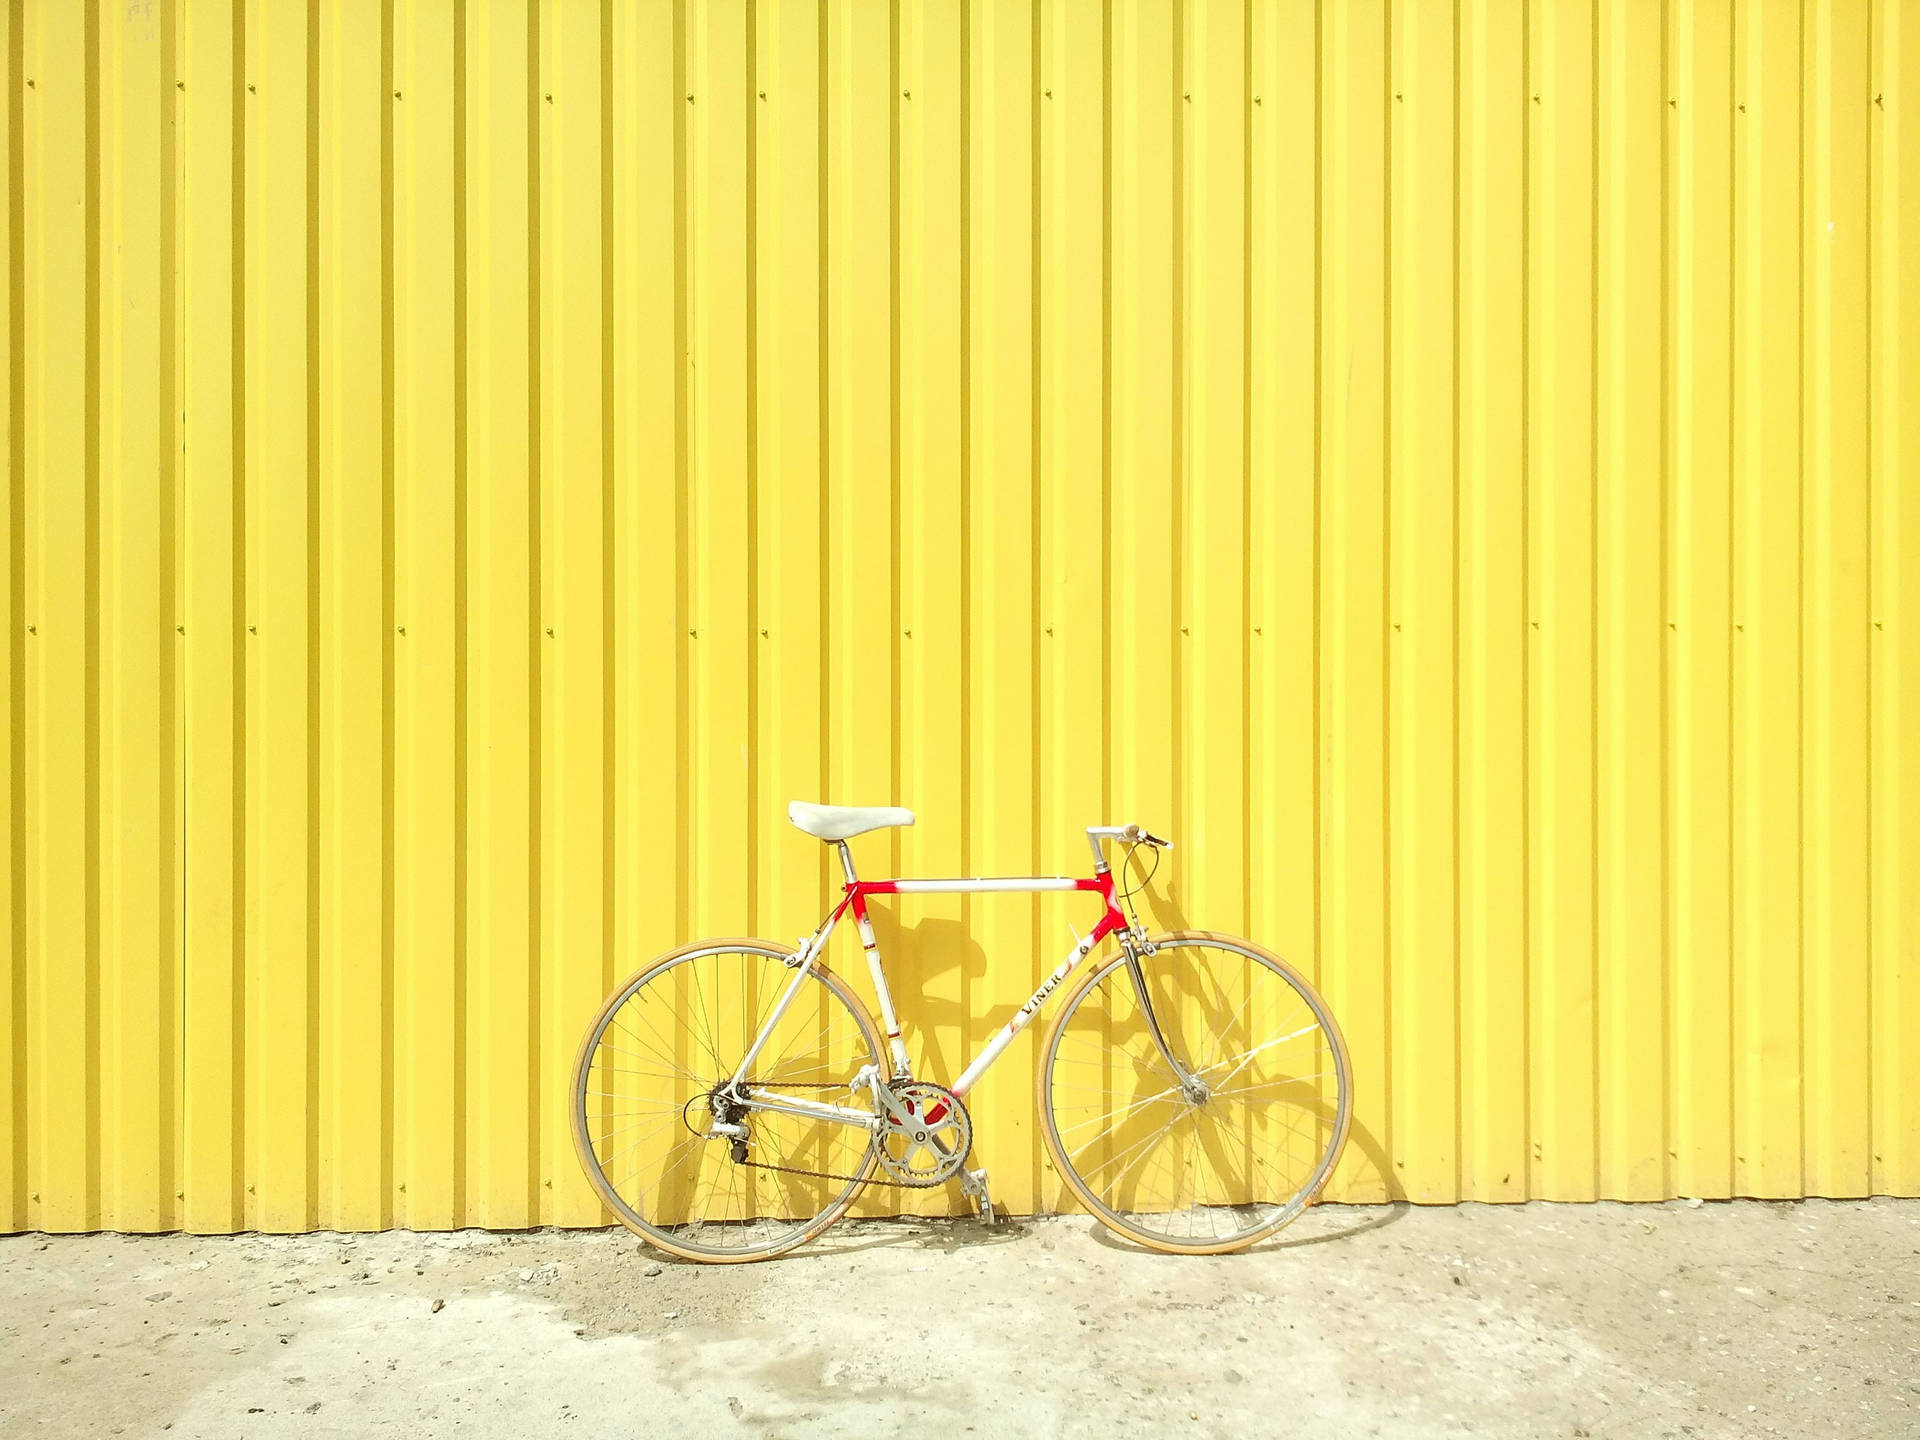 Bike In Yellow Vintage Aesthetic Wall Background